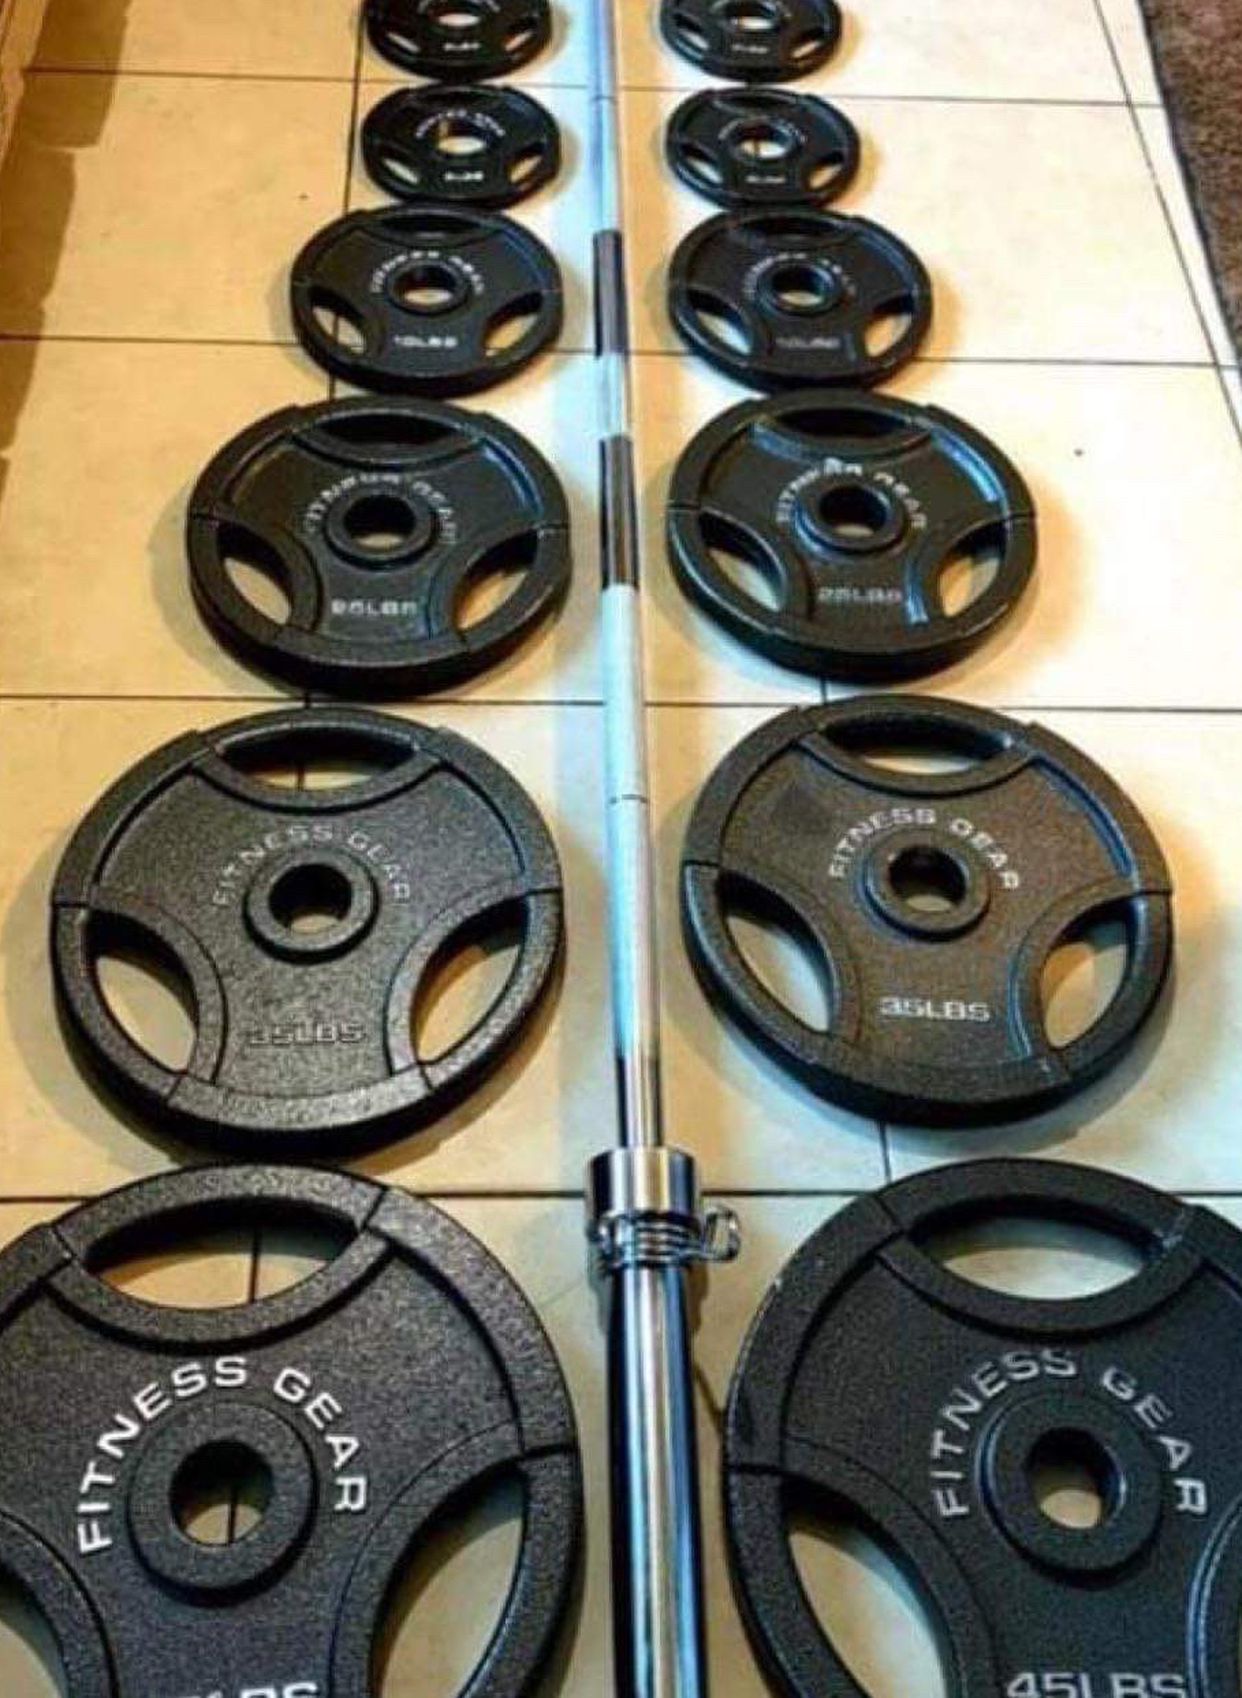 Brand New 🎁300 lbs Olympic Weight Set + 45 LBS Olympic Barbell with Spring Collar Clips🏋🏻‍♀️💪